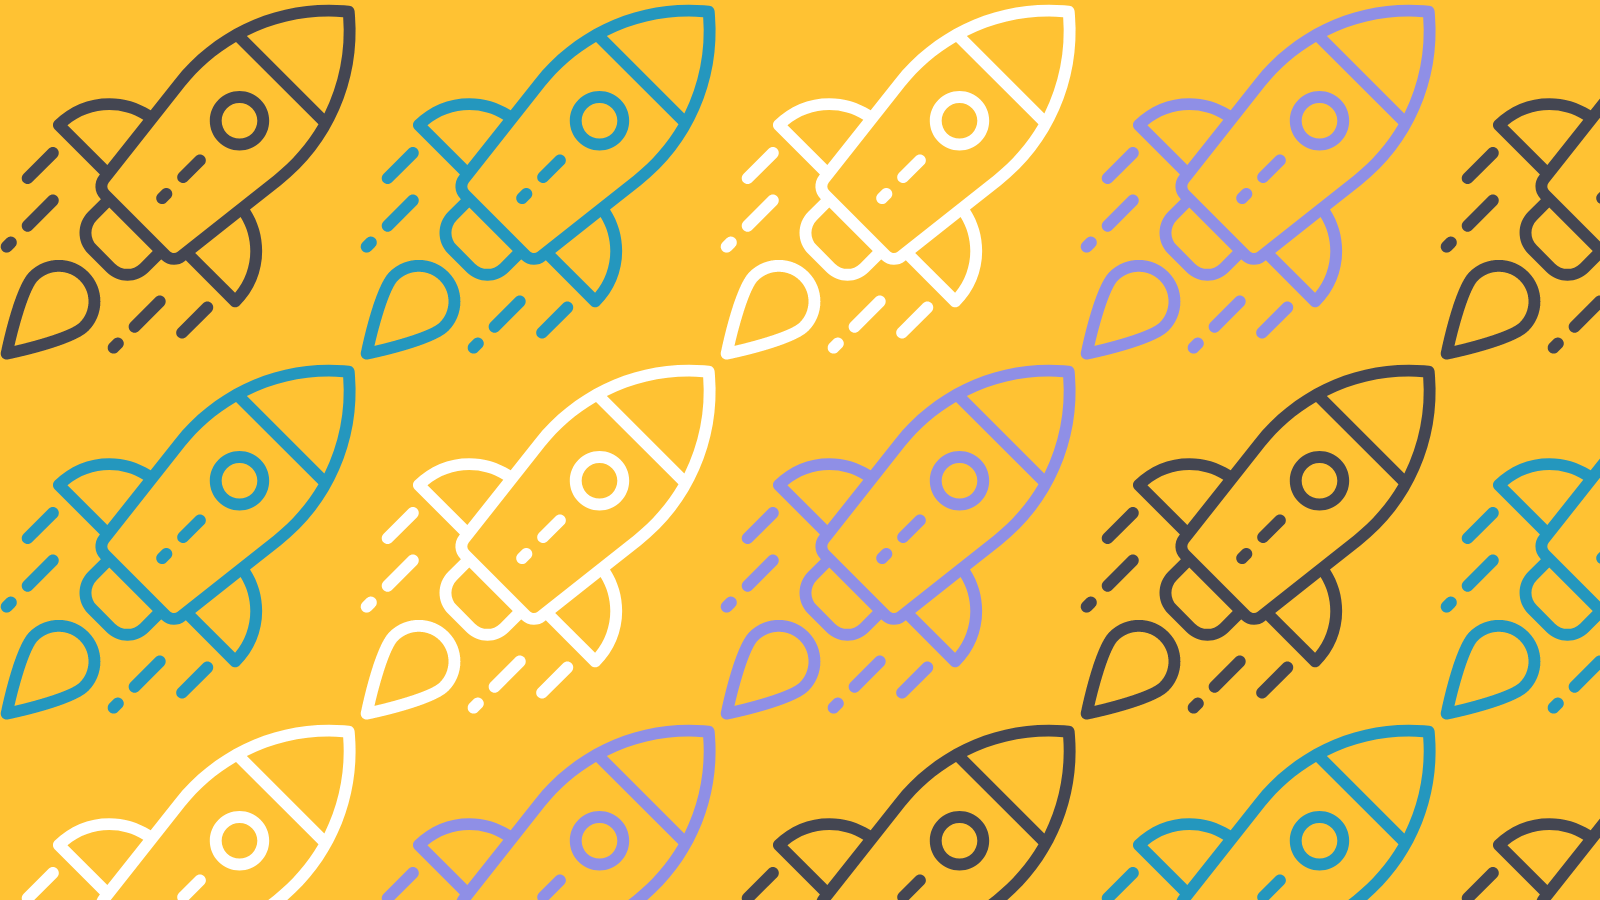 A repeating pattern of minimalist rocket graphics